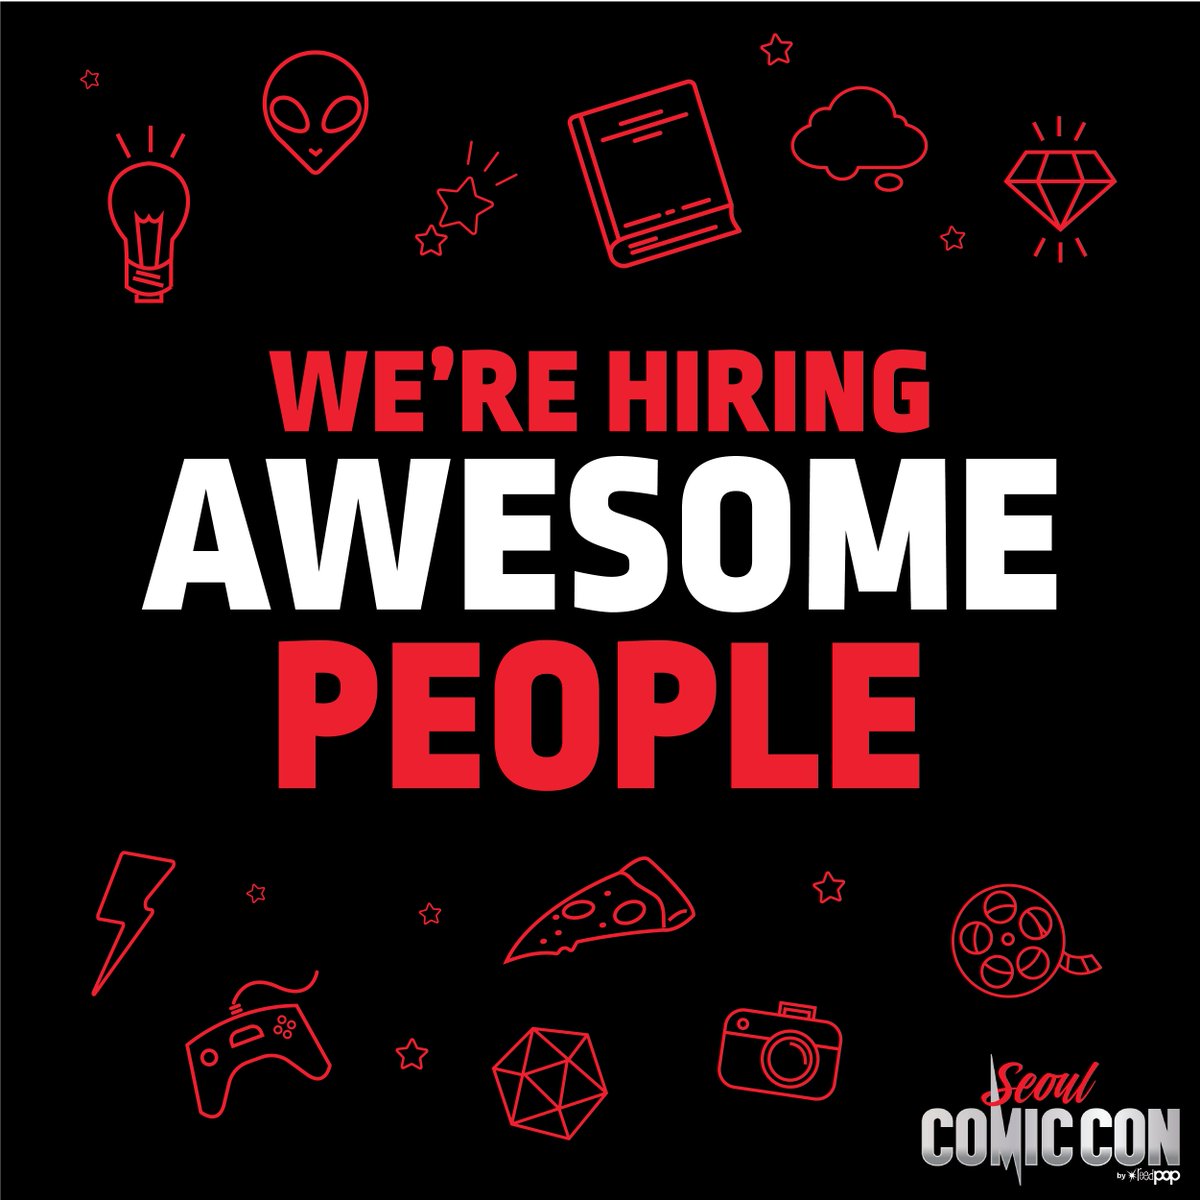 Ready to pursue your passions? We get to live our dreams every day. You should too! @ComicConSeoul is looking for a new Senior Project Manager to join the team. Click to apply now! bit.ly/2sK8LDa #joblisting #levelup #wearehiring #jobopening